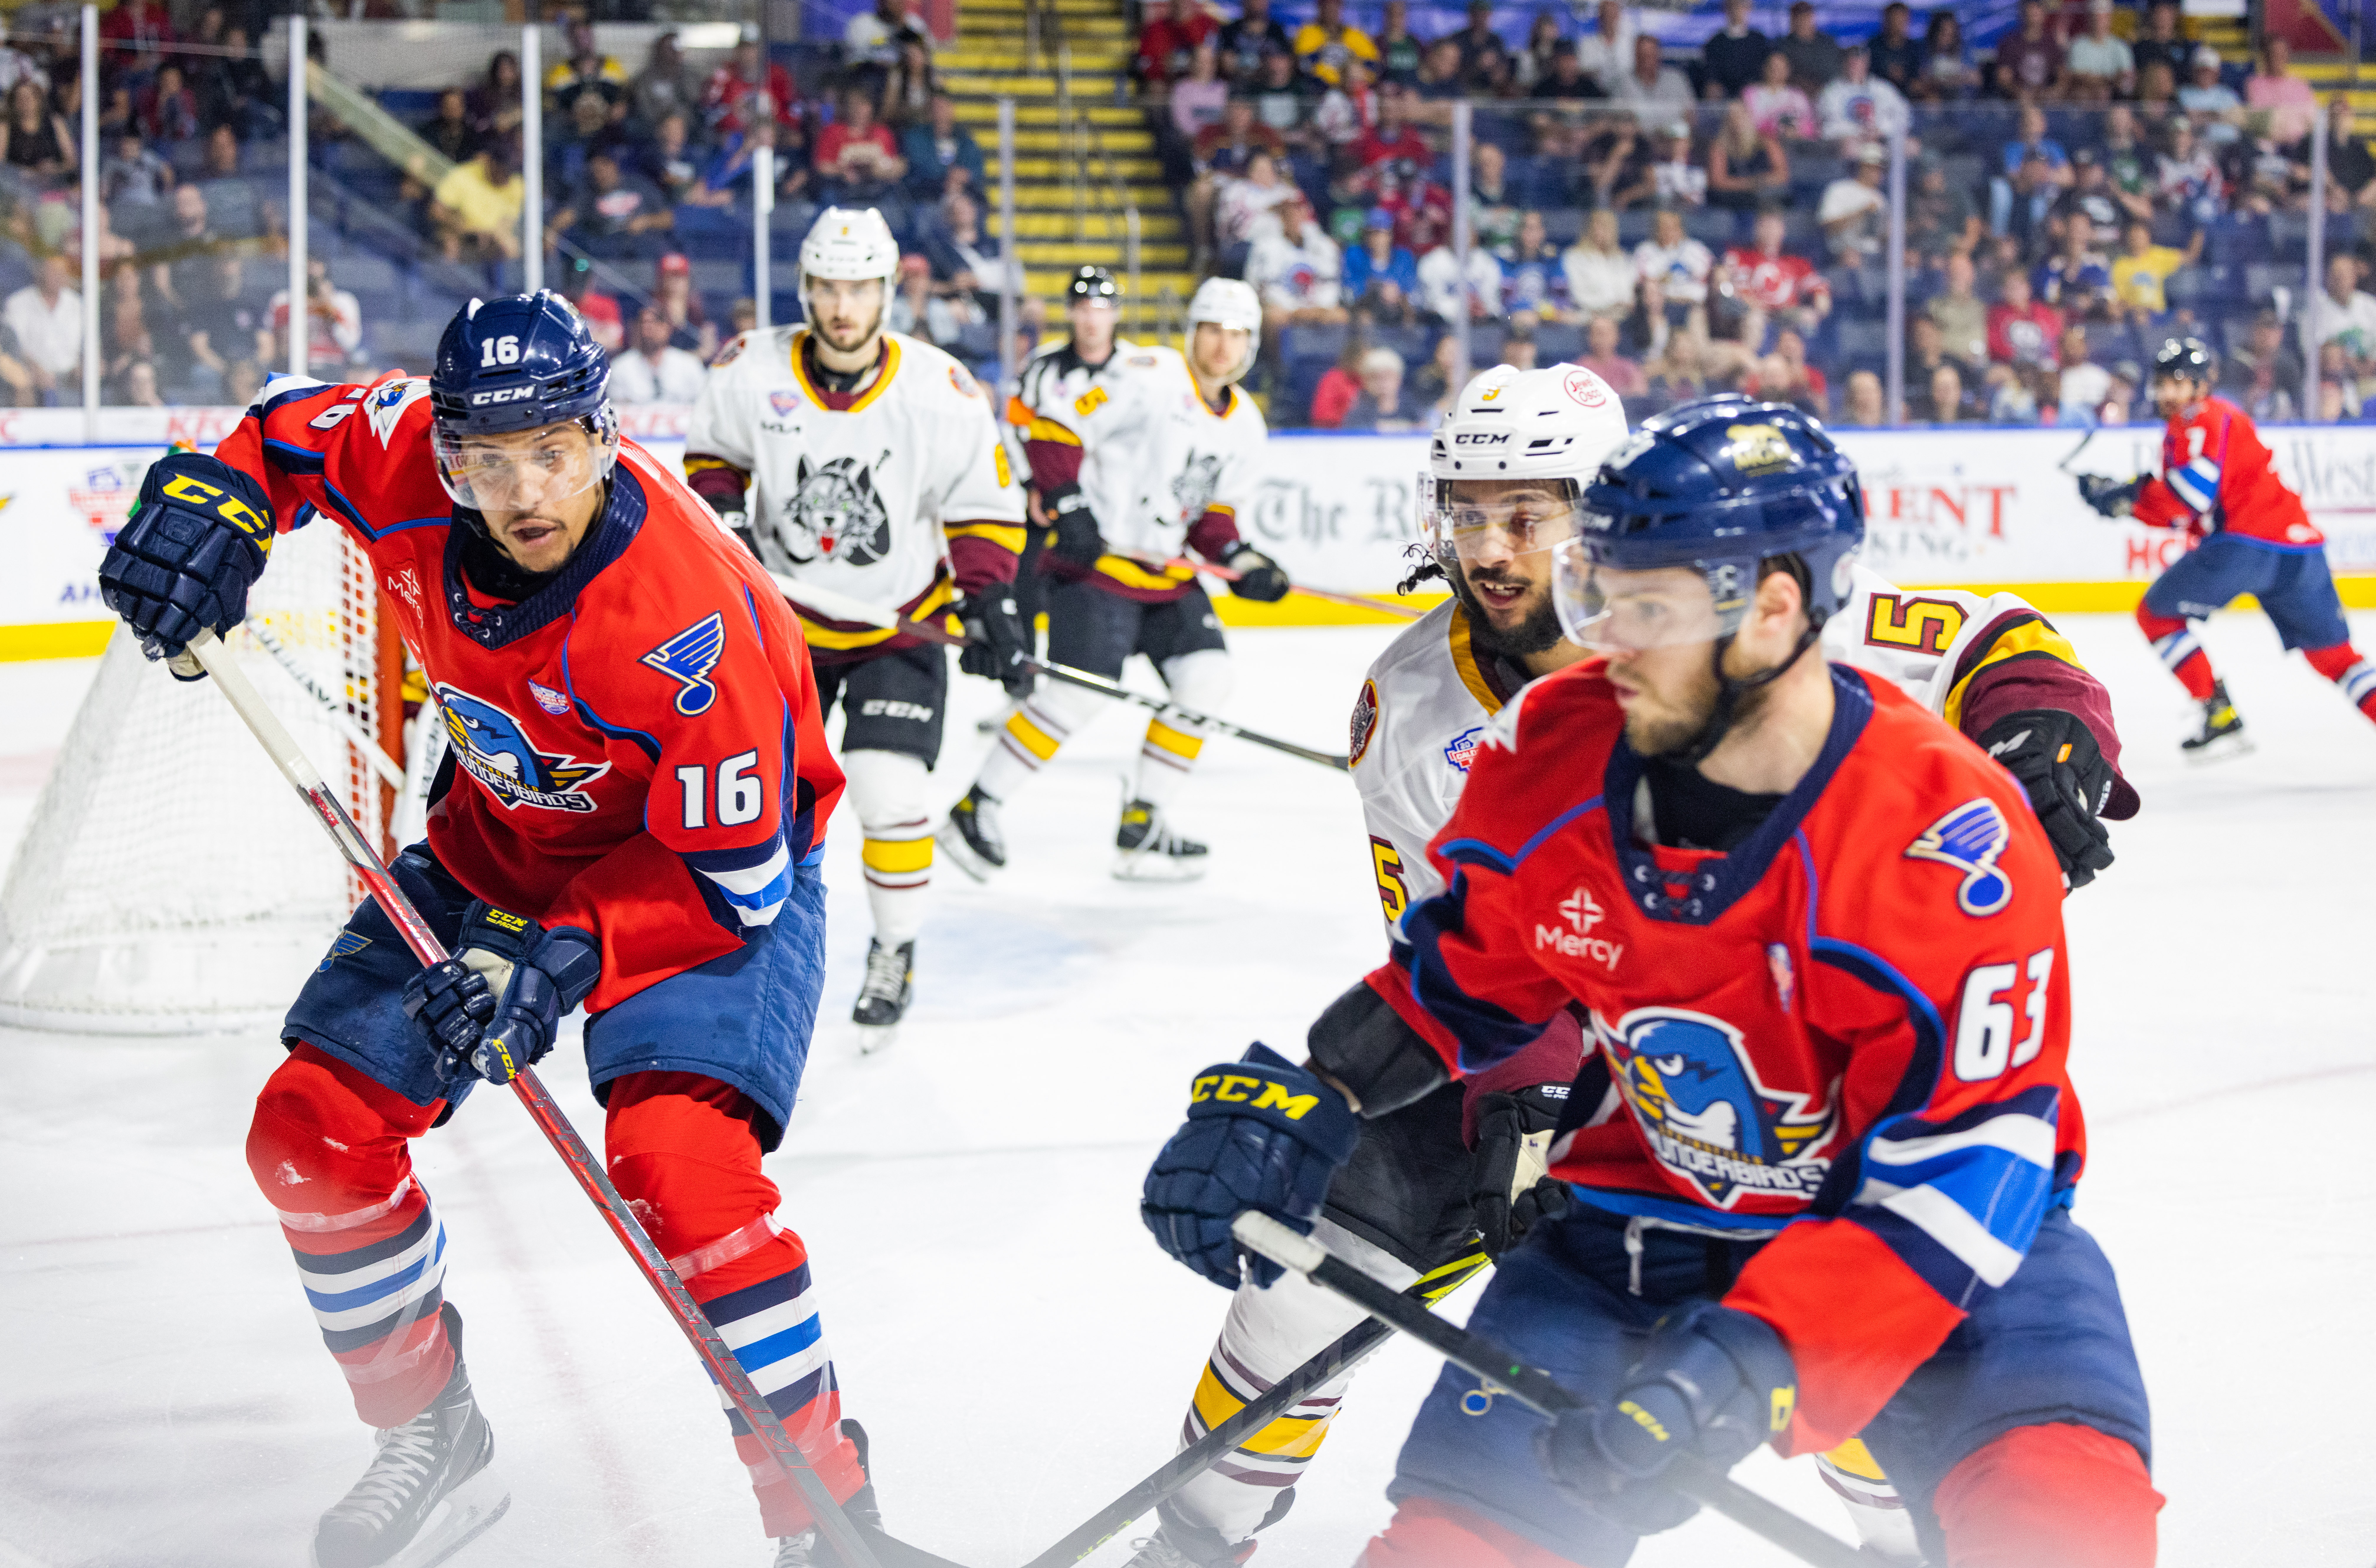 BarDown on X: The Springfield Thunderbirds switched things up for